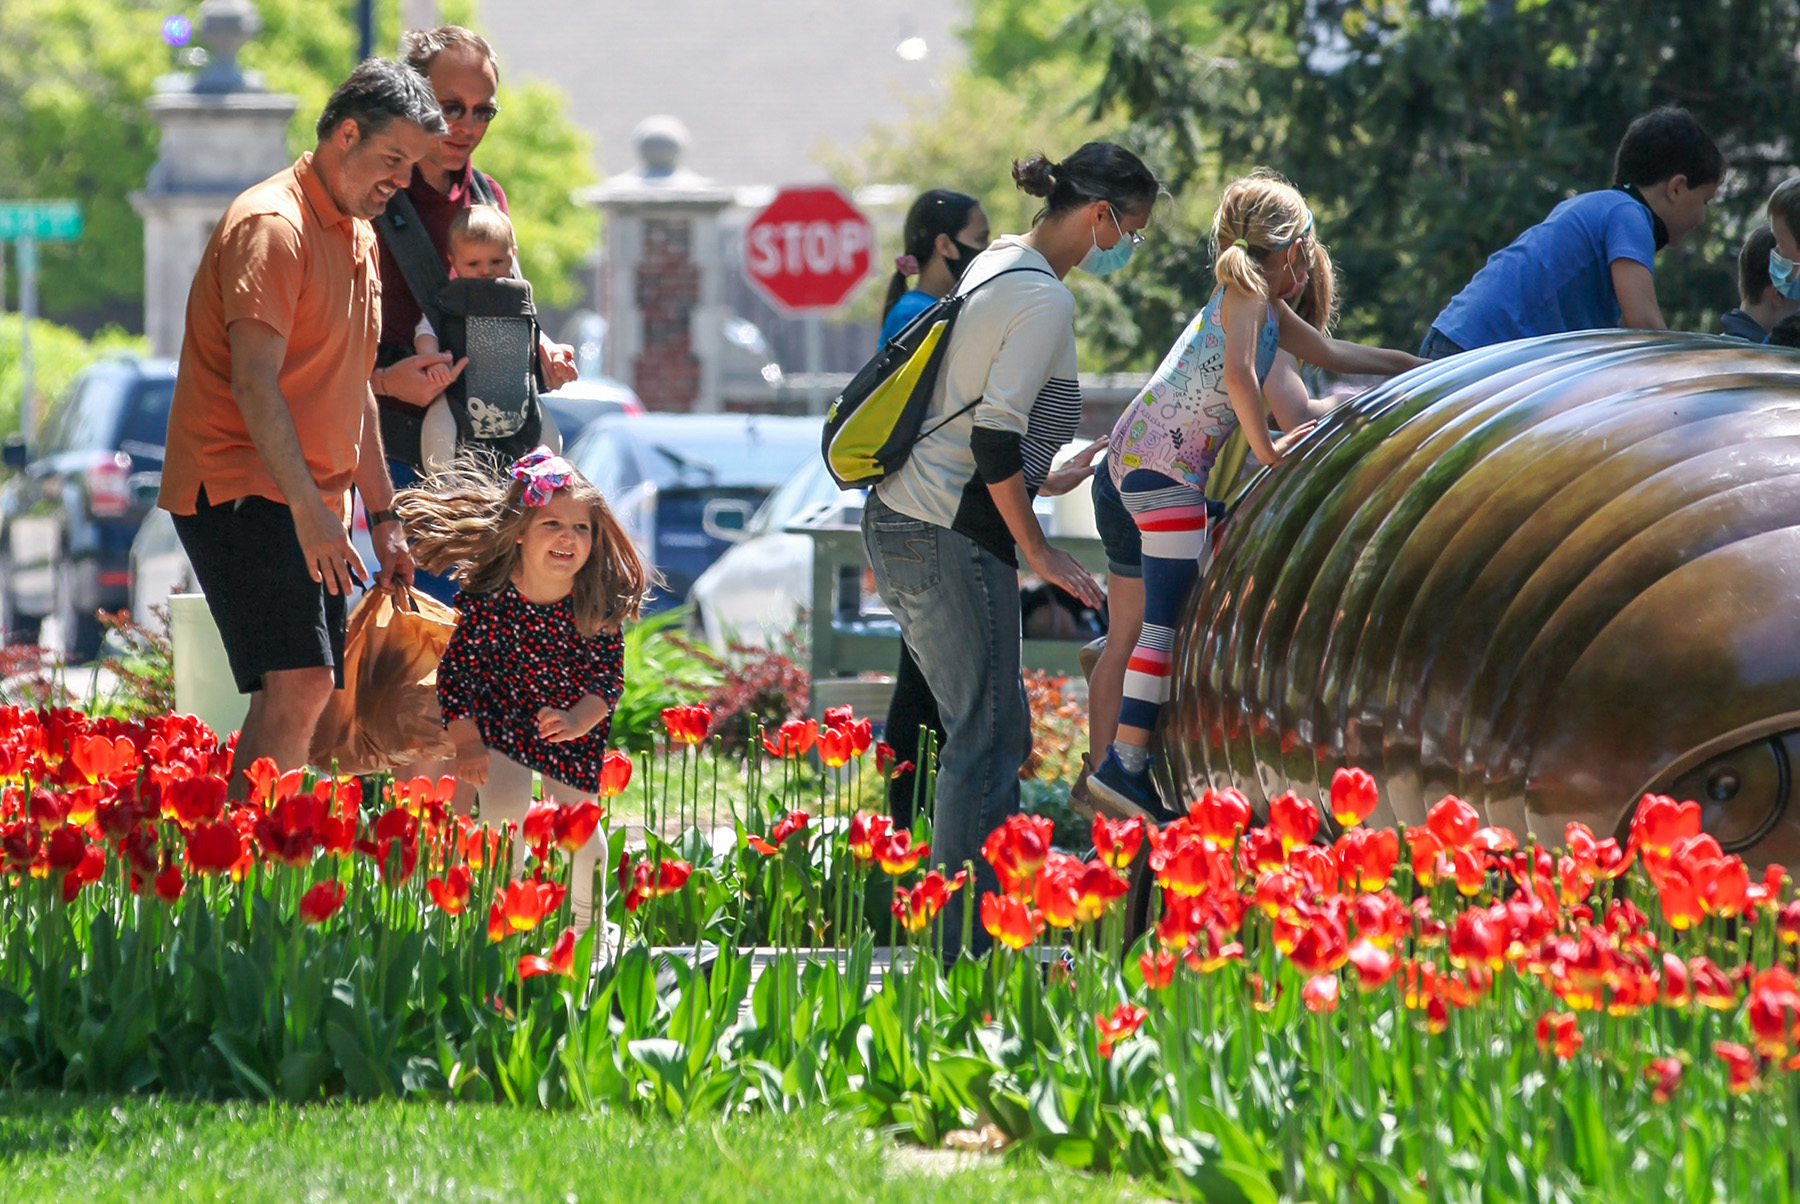 Family enjoying an outdoor sculpture surrounded by tulips at Ulrich Family Fun Day